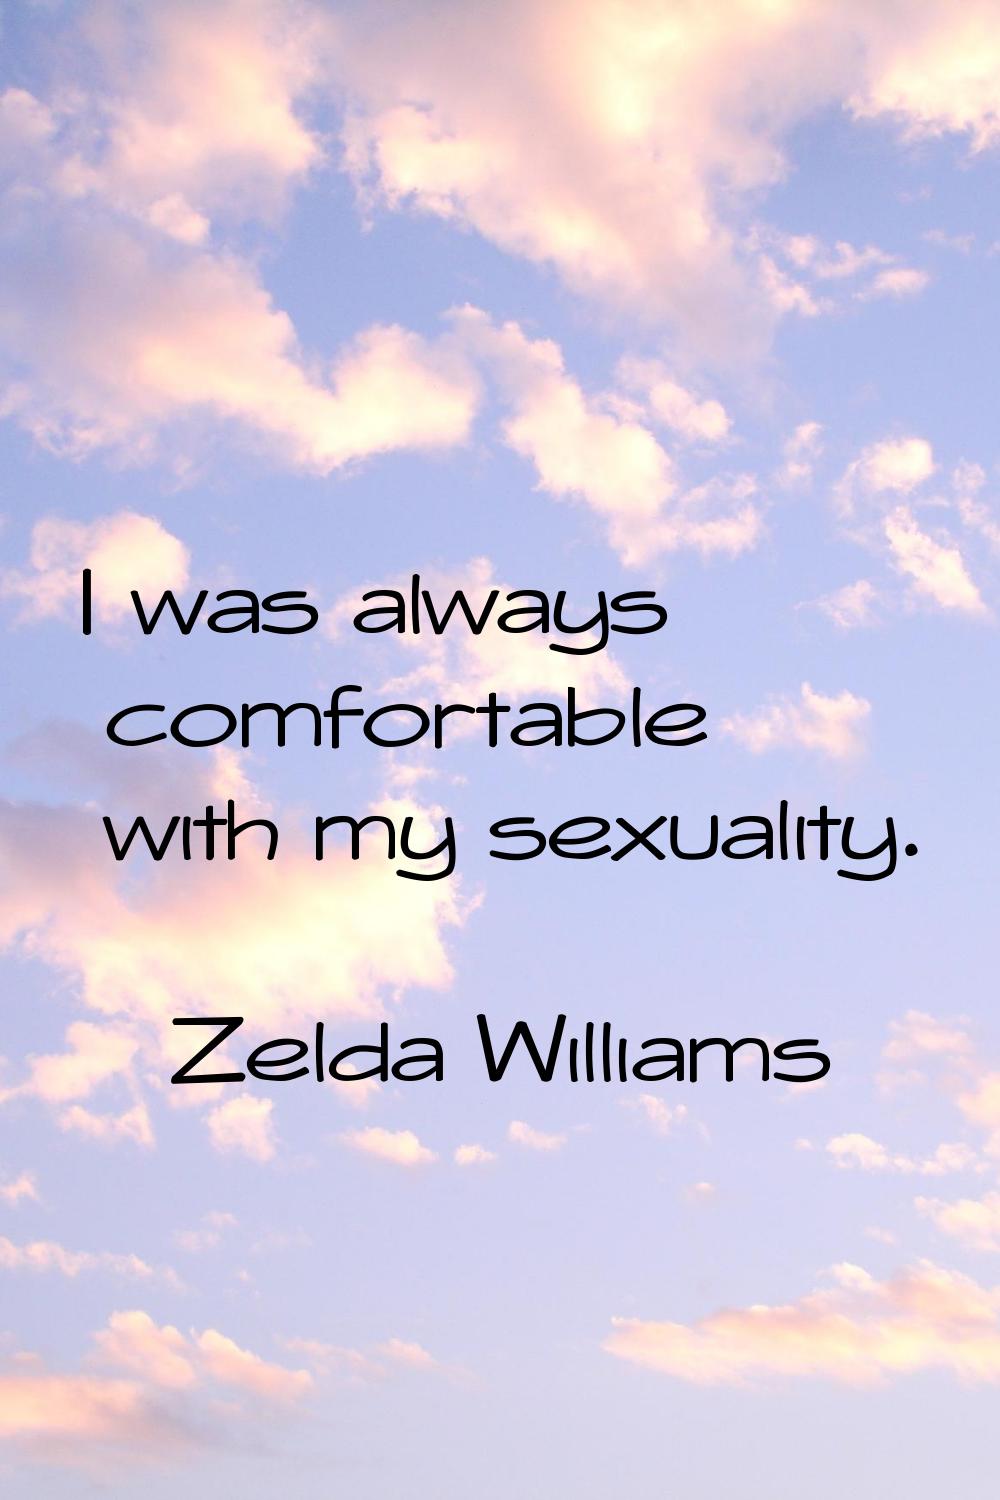 I was always comfortable with my sexuality.